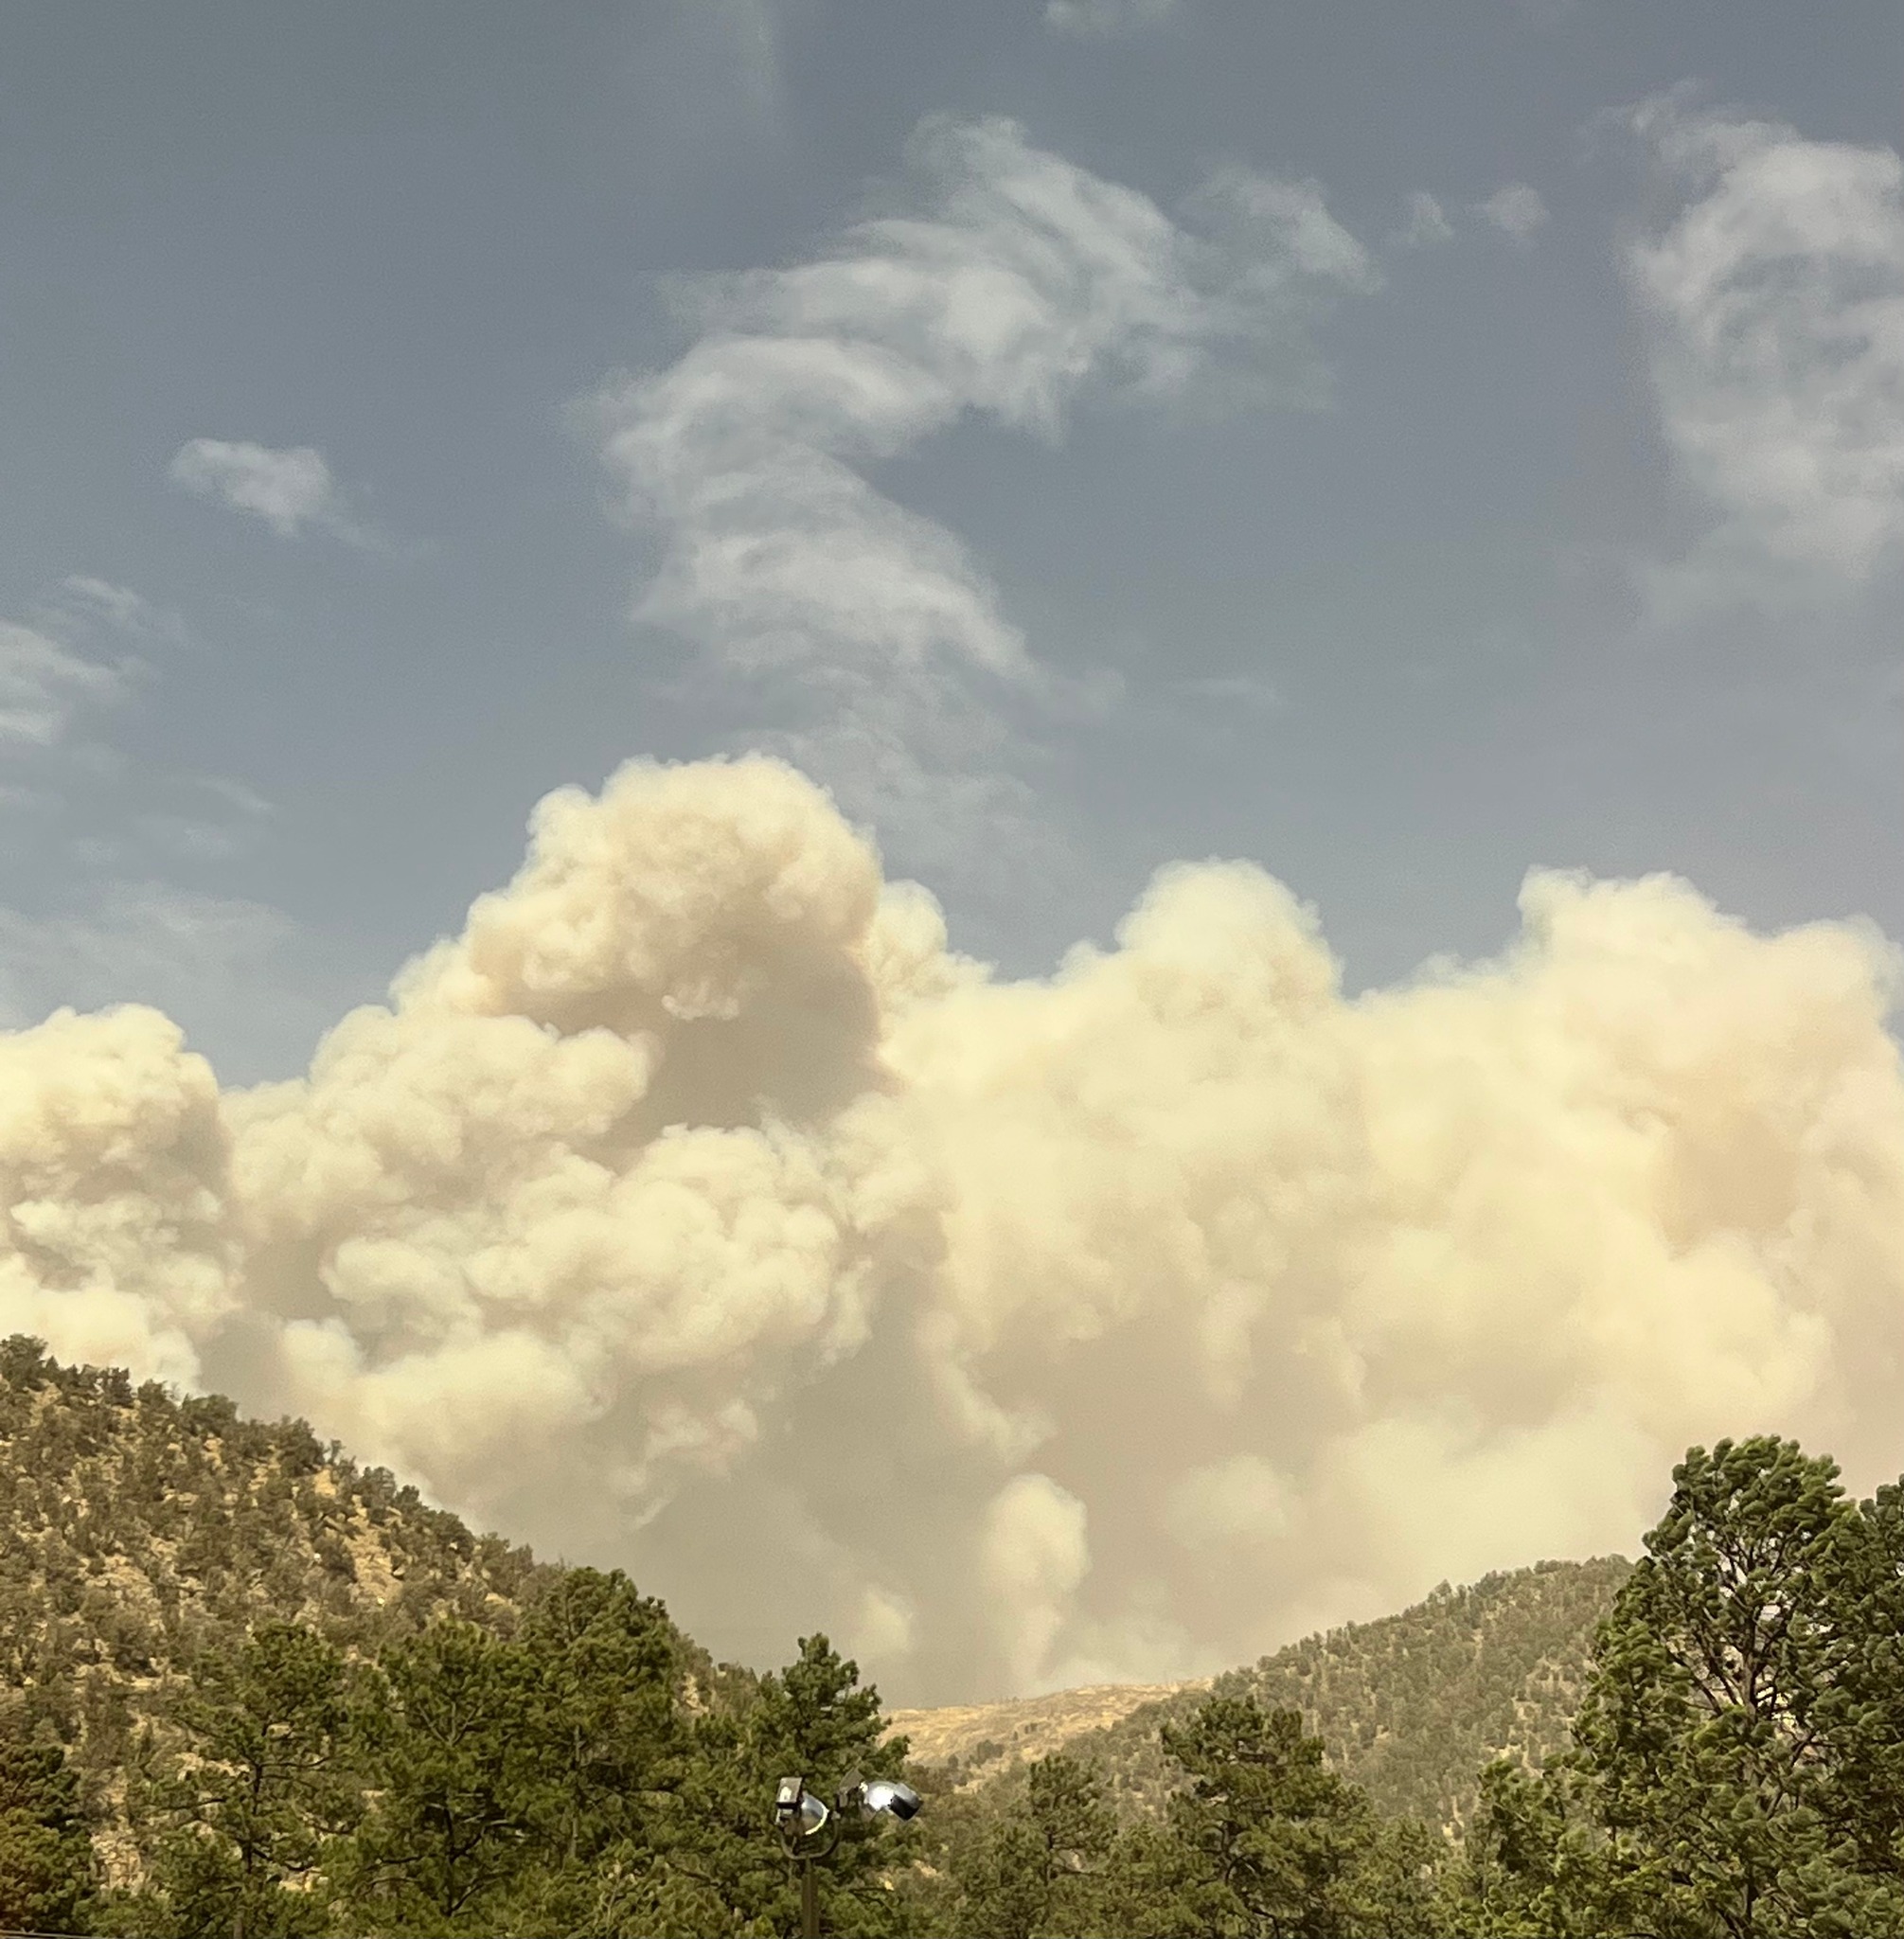 McBride Fire Claims Two Lives, Damages +150 Homes in NM